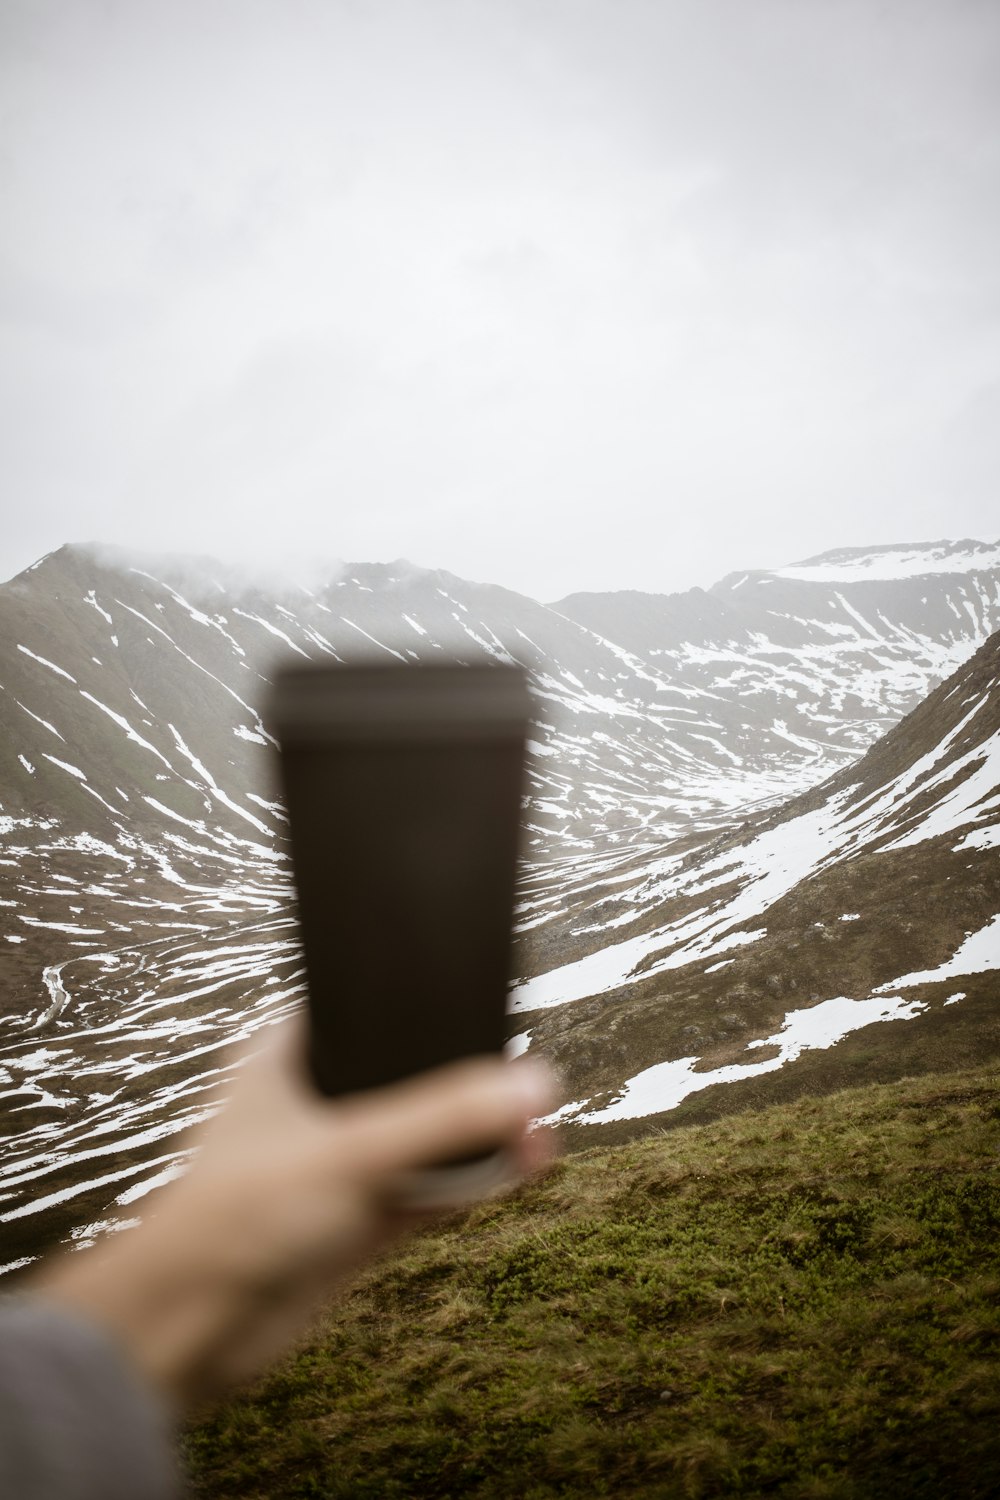 person holding black cup near green grass field and snow covered mountain during daytime